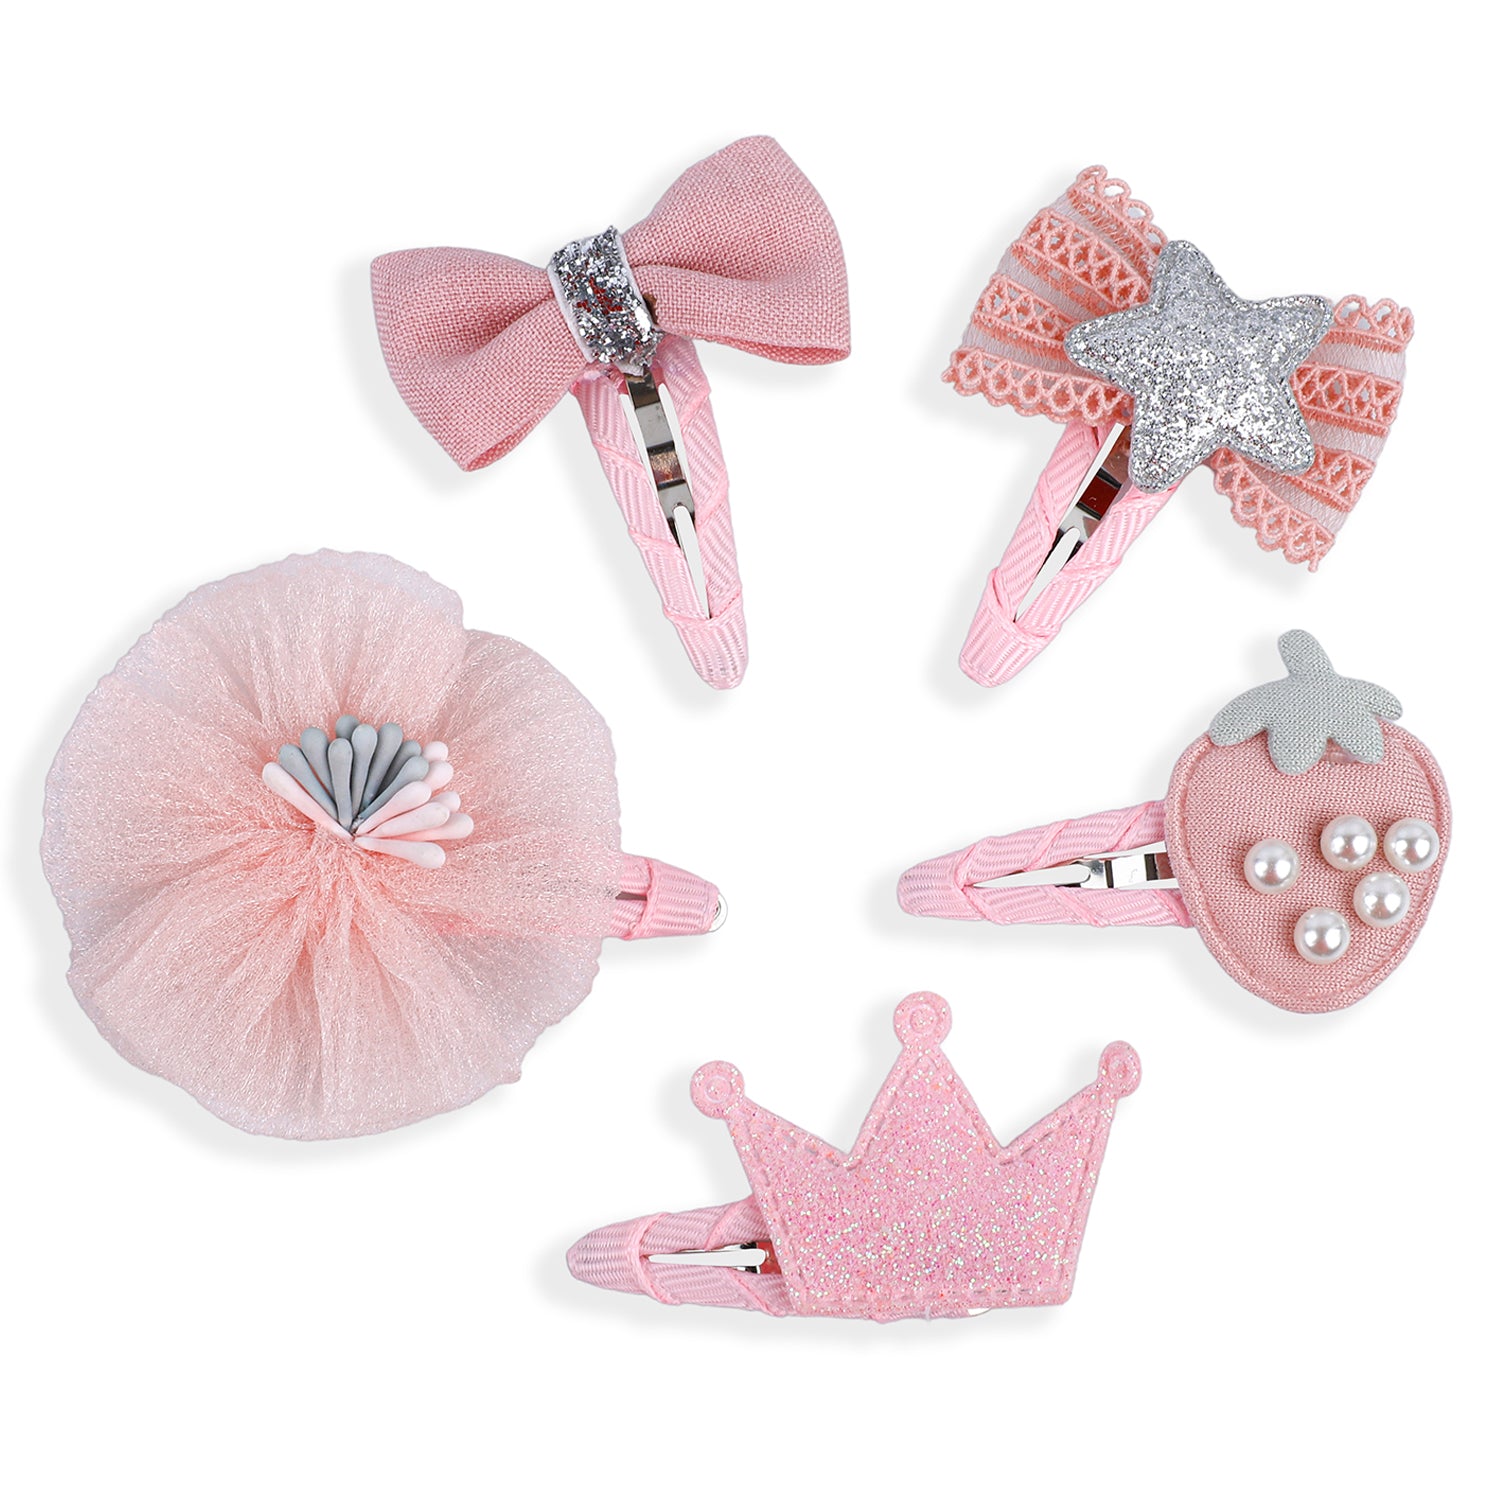 Irene Bows Hair Clips 5 Pcs - Pink